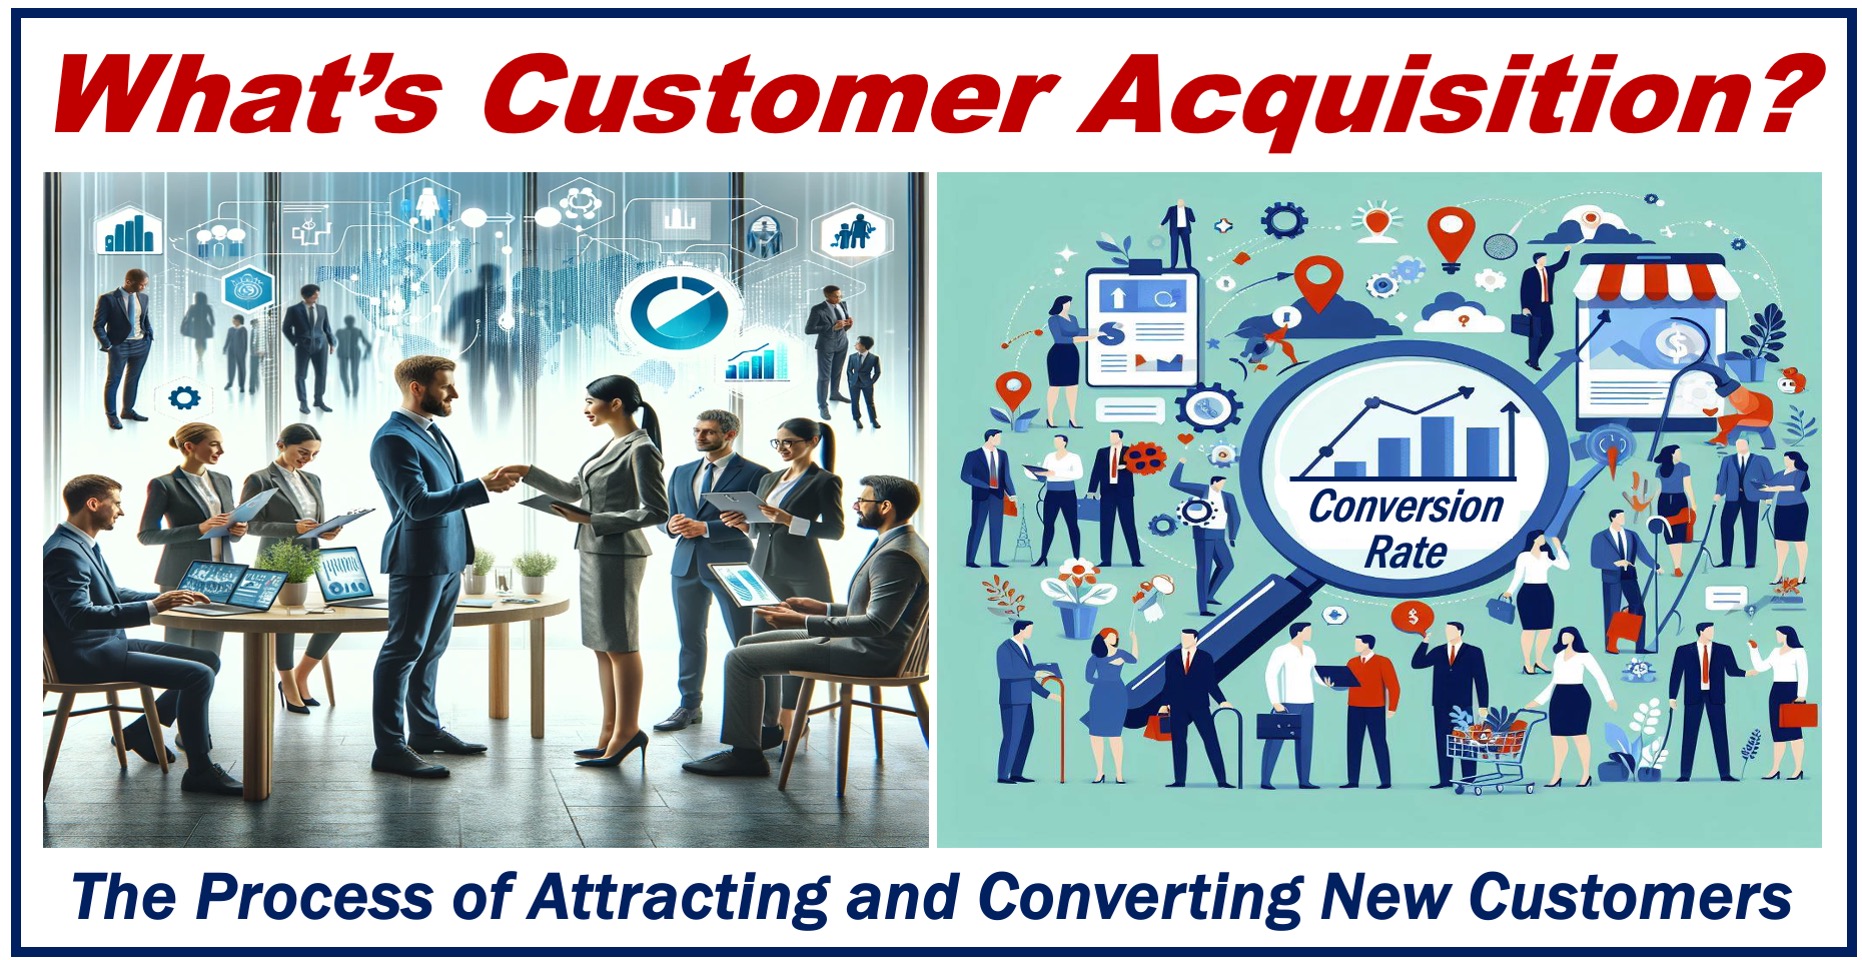 Two images showing teams of marketing professionals involved in Customer Acquisition